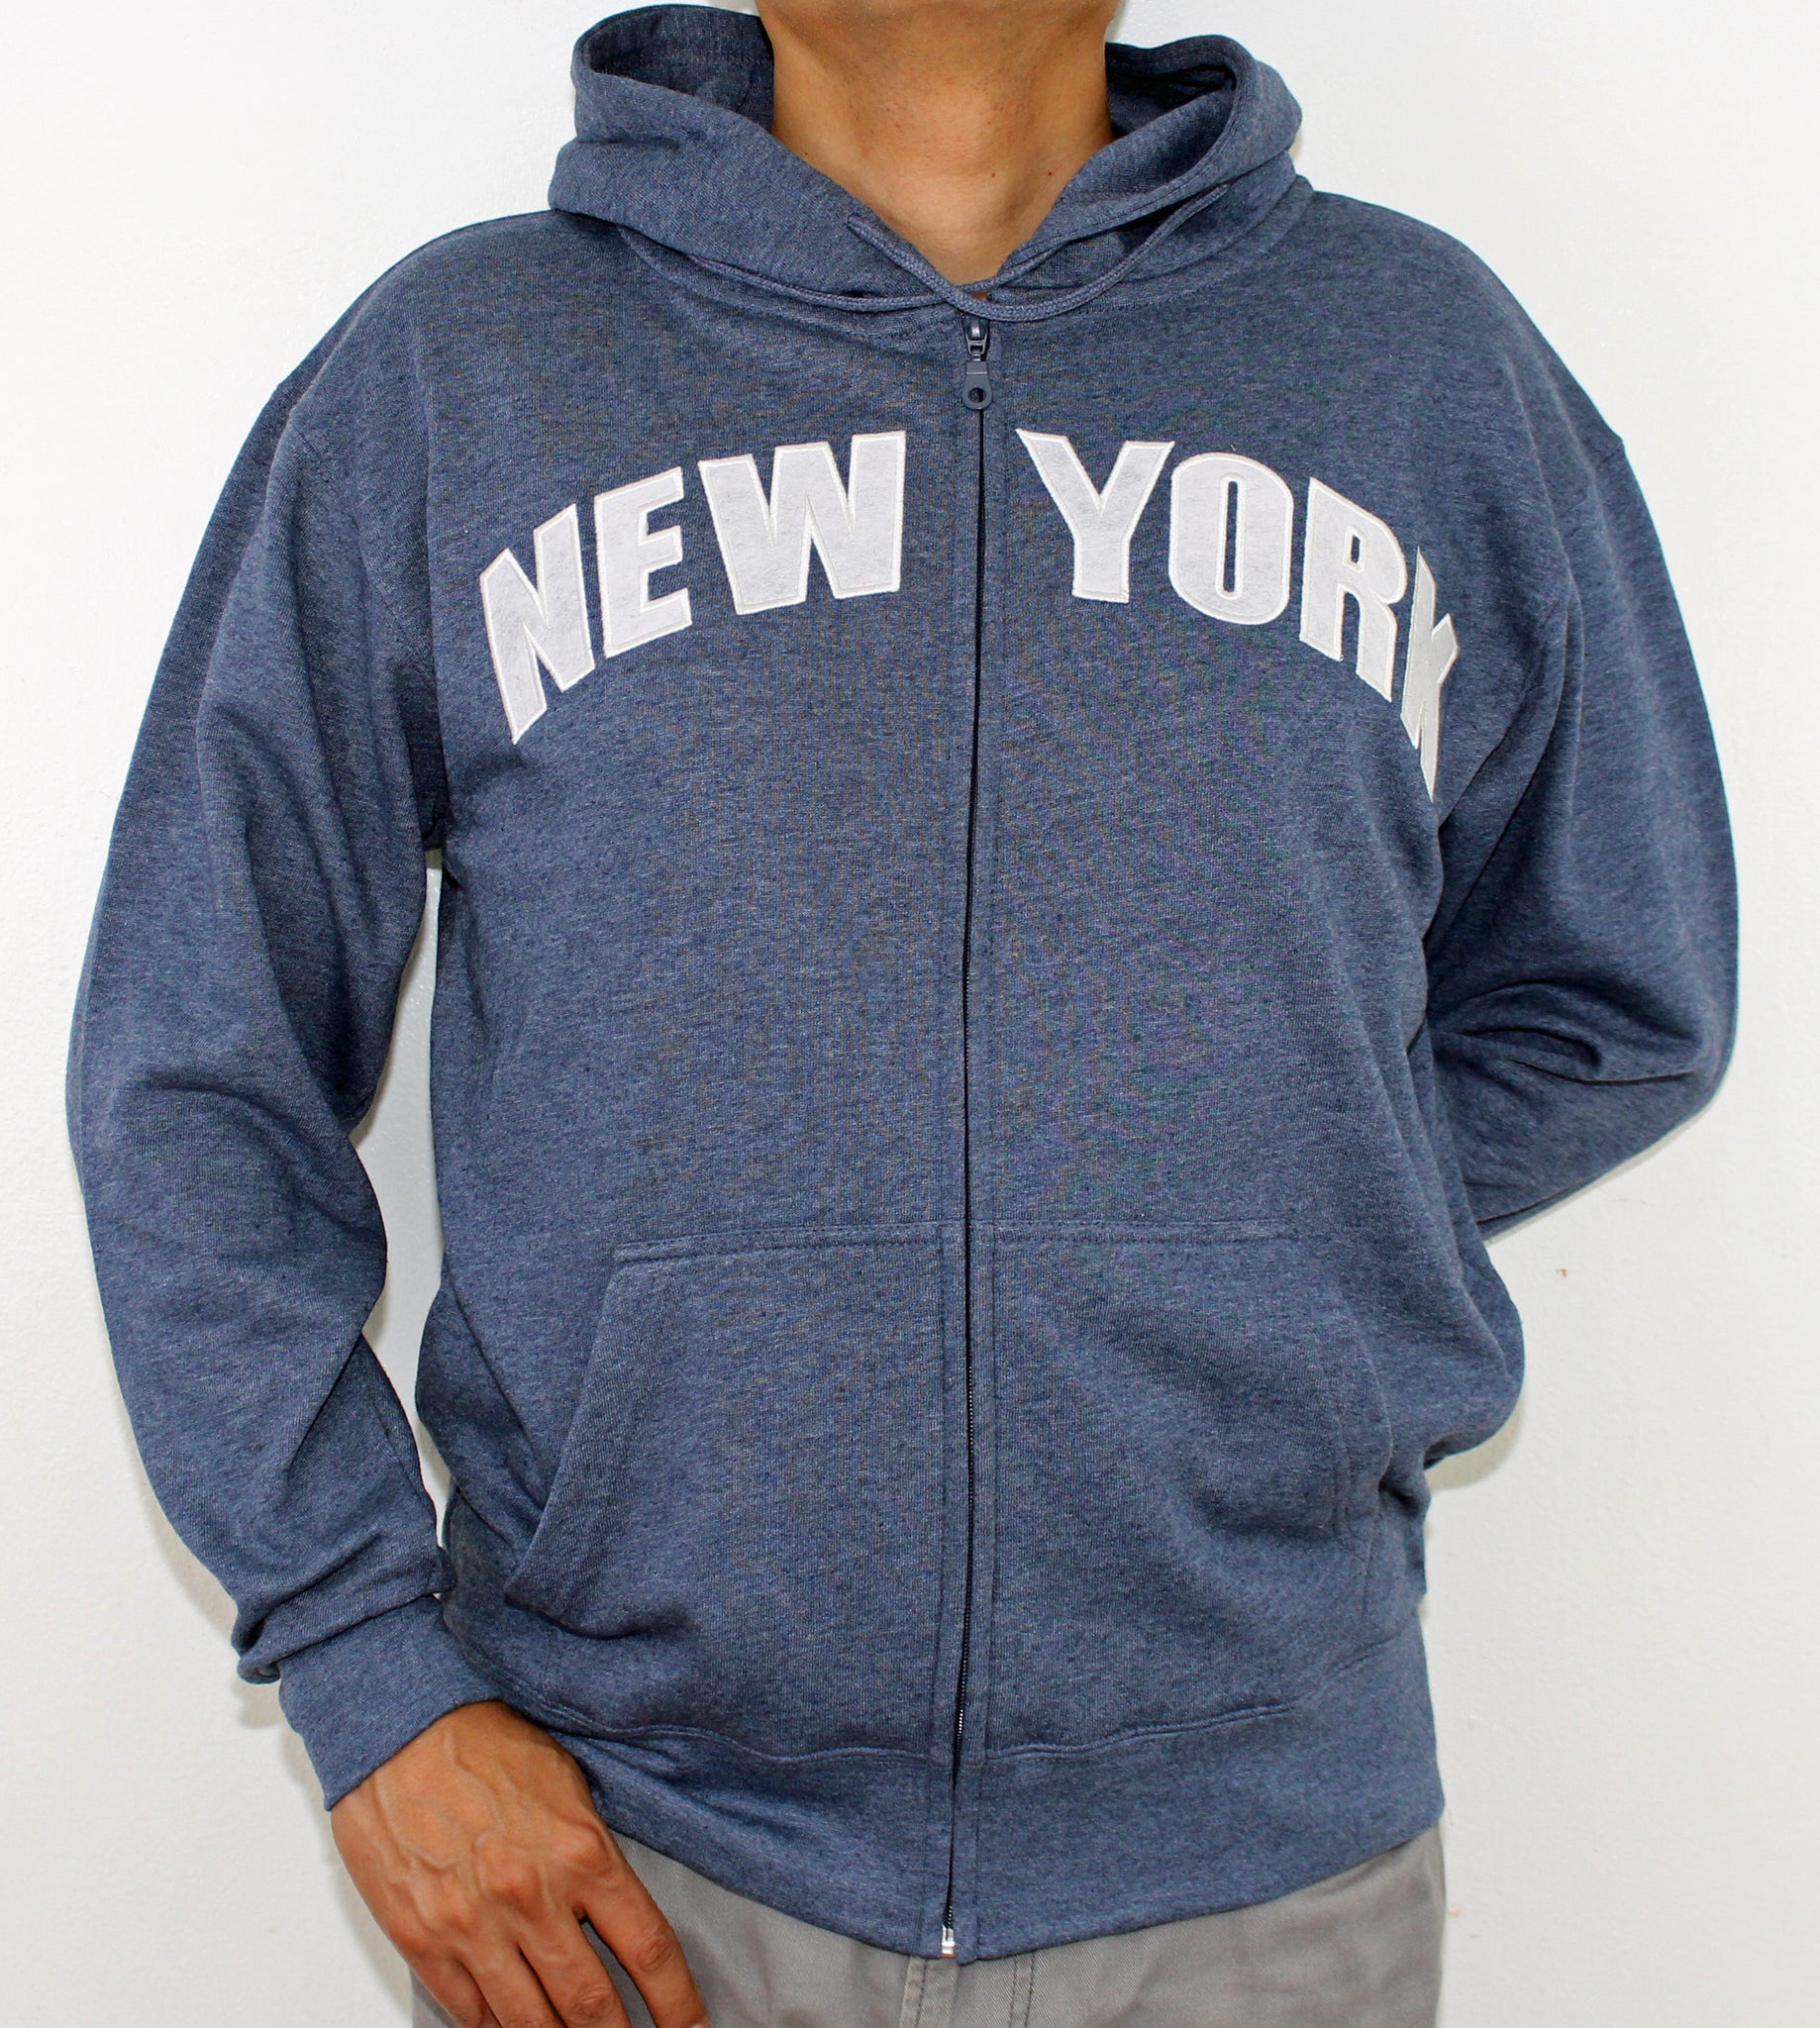 Adult Zipper Hoodies Embroidered with NEW YORK – WALI USA INC